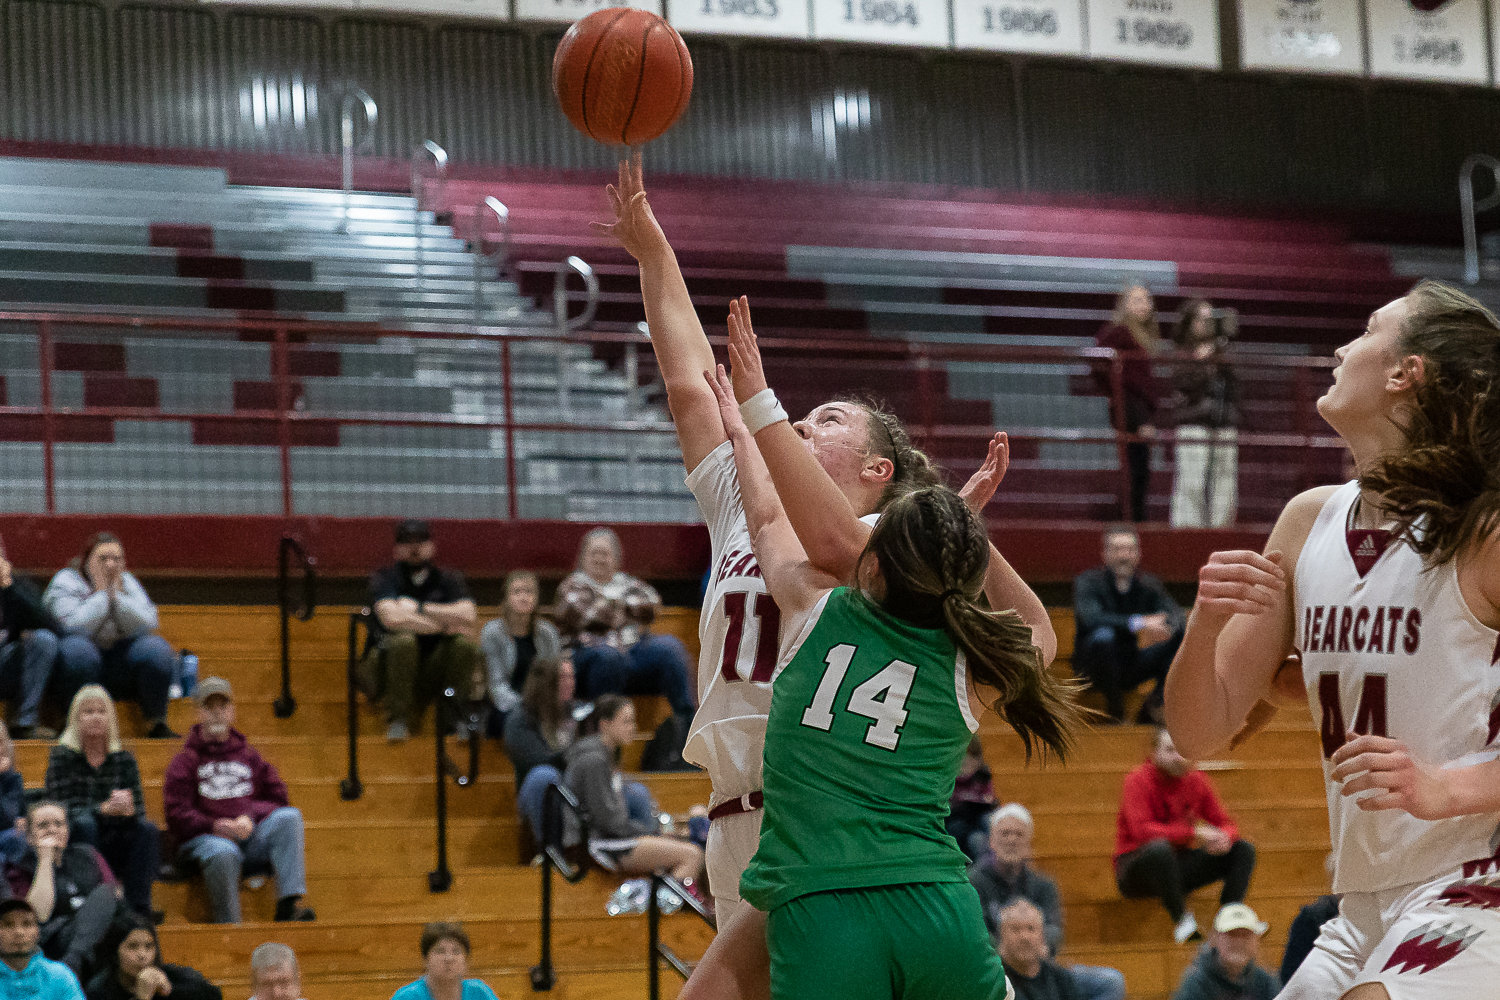 W.F. West guard Lena Fragner makes a layup with some contact against Tumwater Jan. 26.